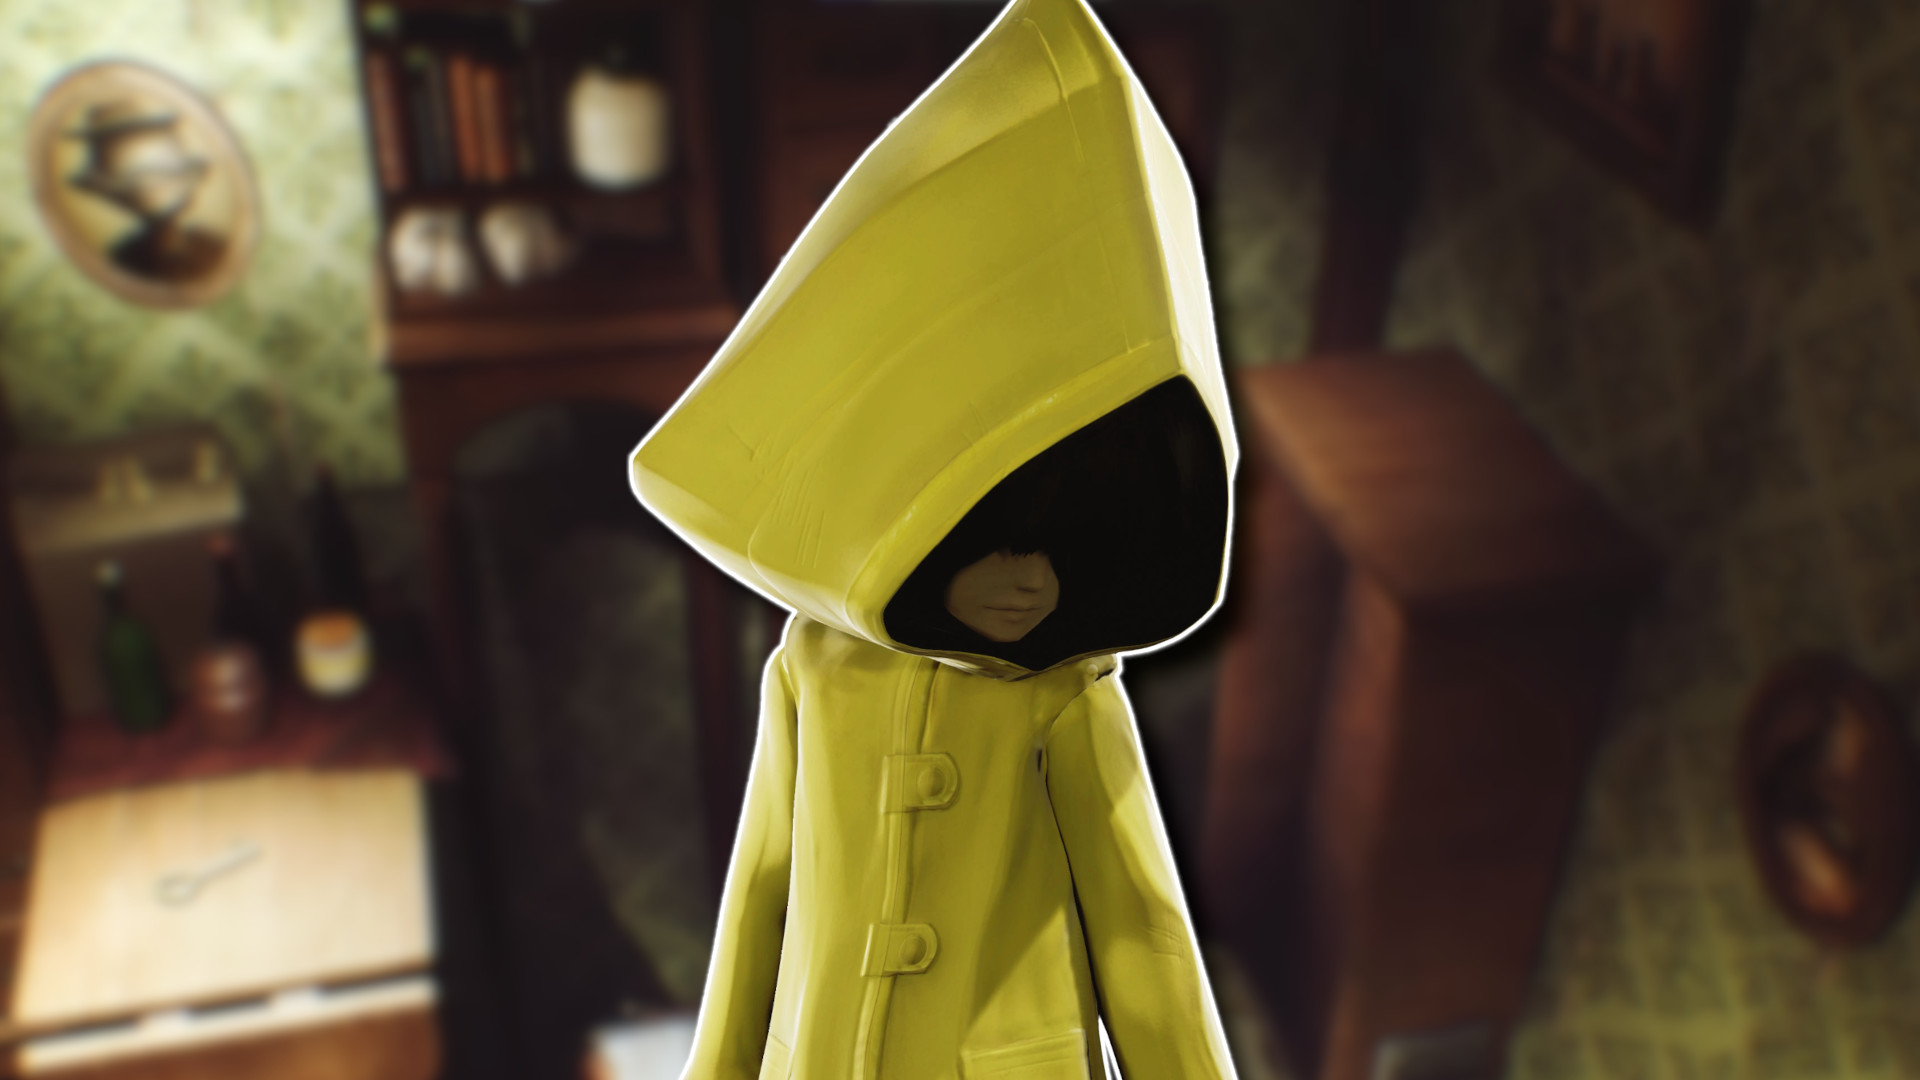 Players beware, you're in for a scare with Little Nightmares on mobile